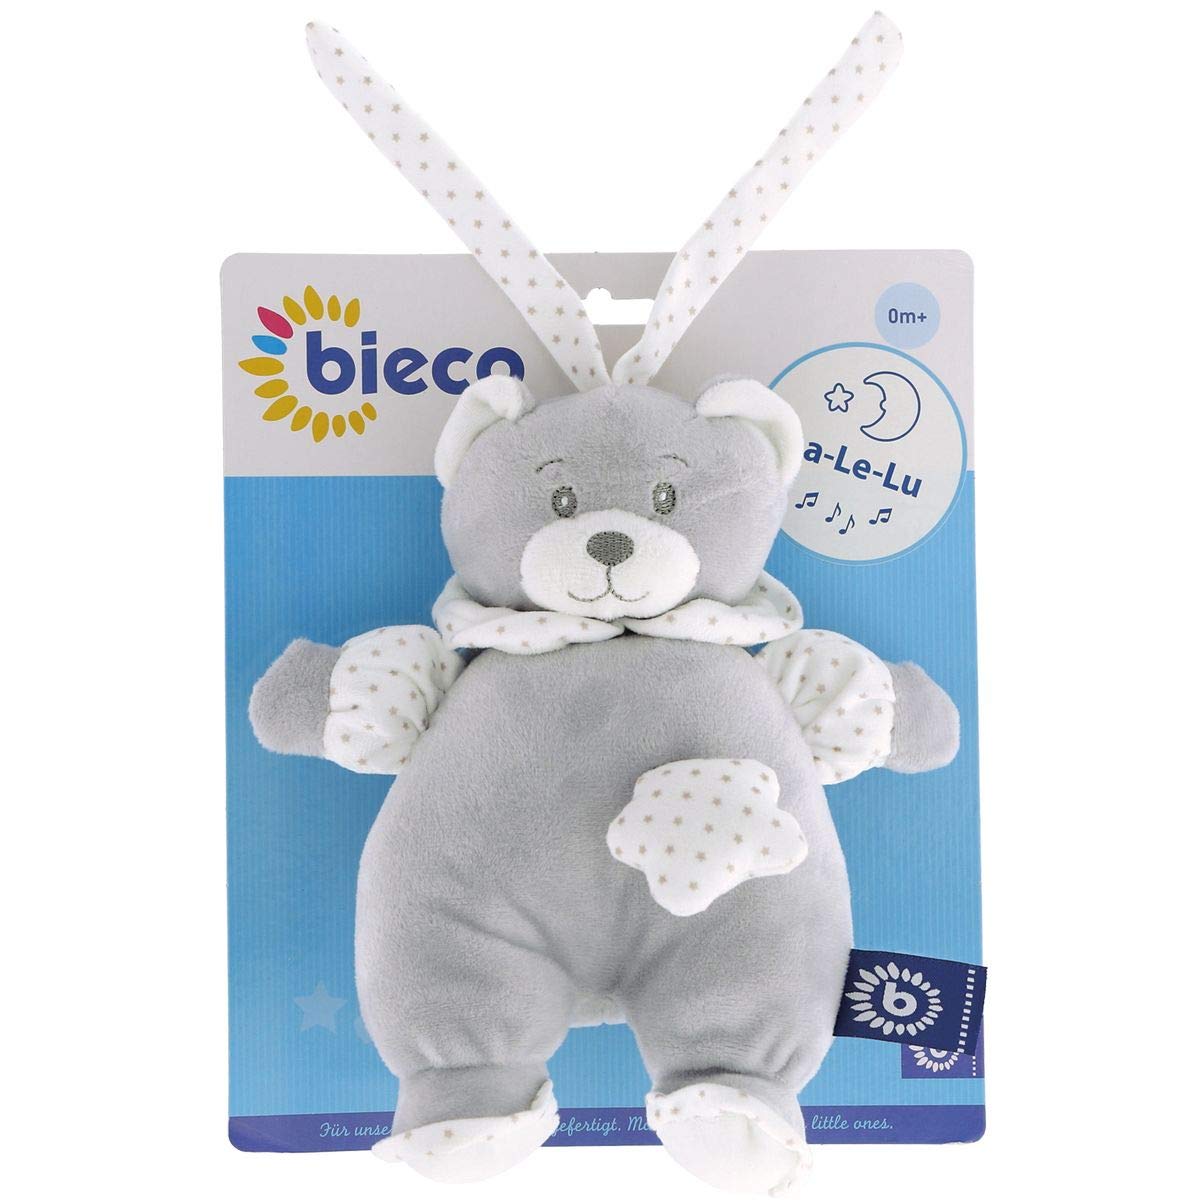 Bieco music box plush toy and music box in one, sleep aid with melody La-Le-Lu cuddly friend comforter and toddlers grey